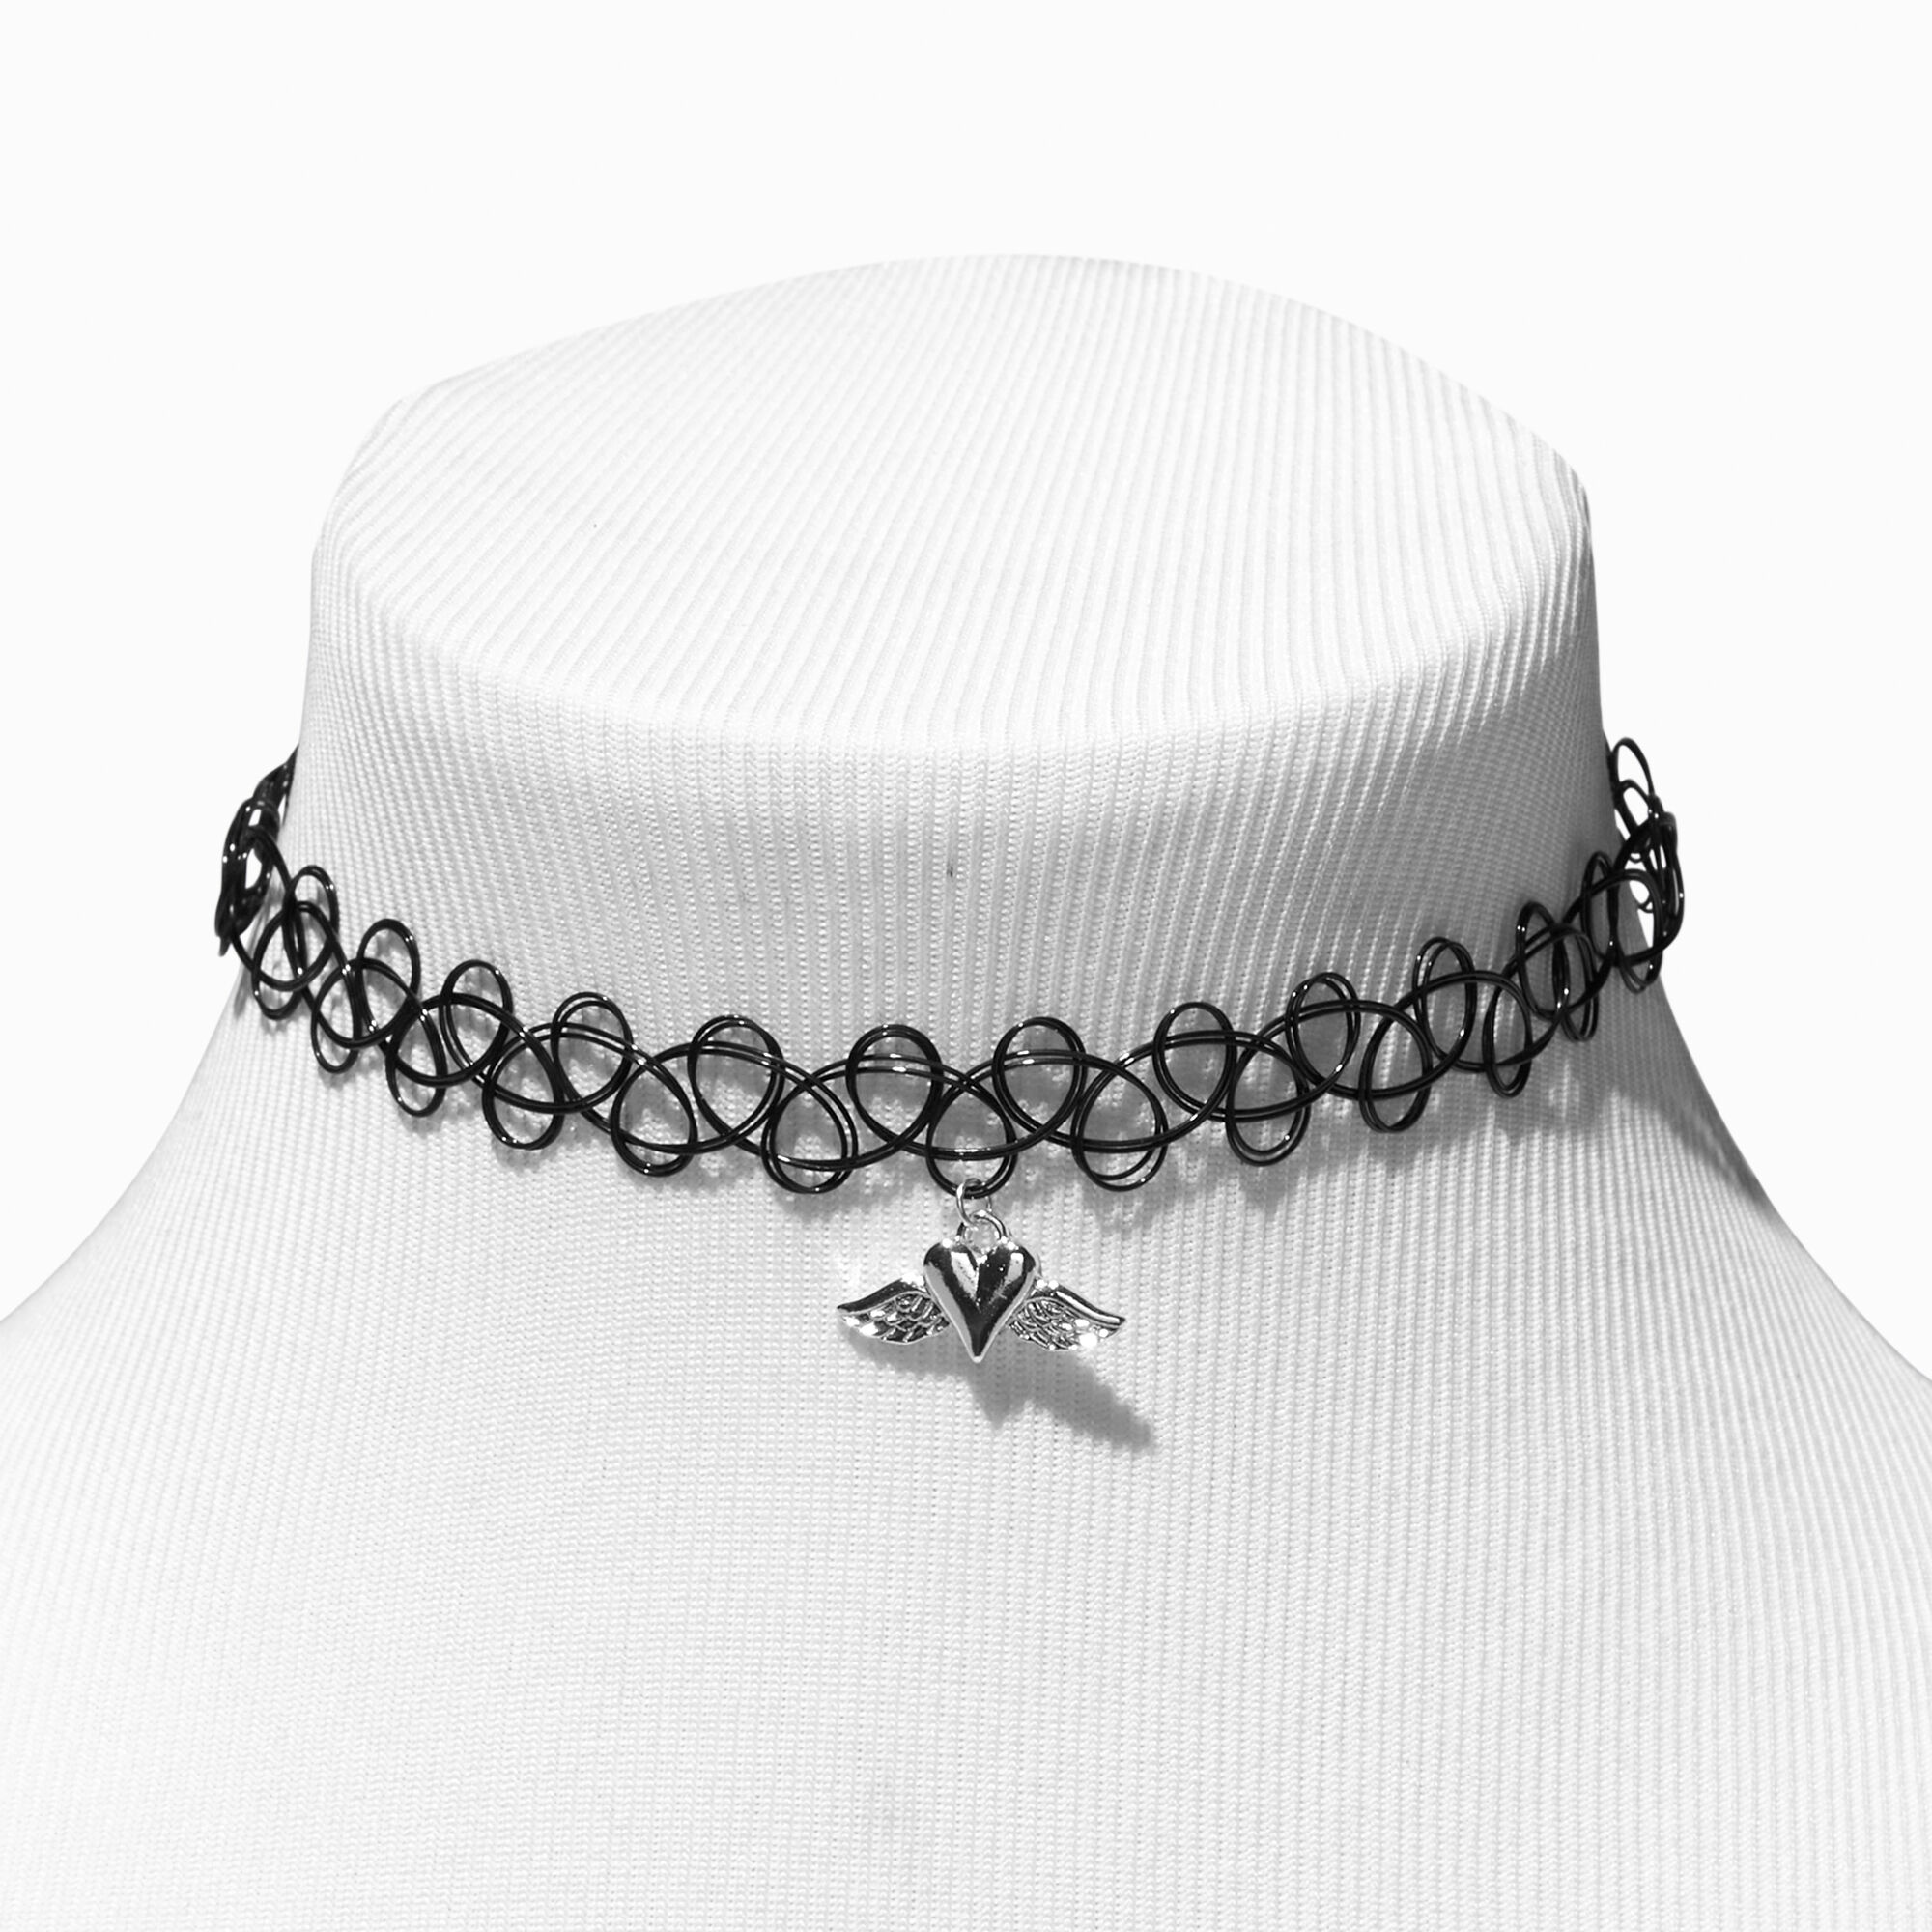 ITEM NUMBER 021612 TATTOO CHOKER NECKLACE 12 PIECES PER DISPLAY – Novelty  Closeout